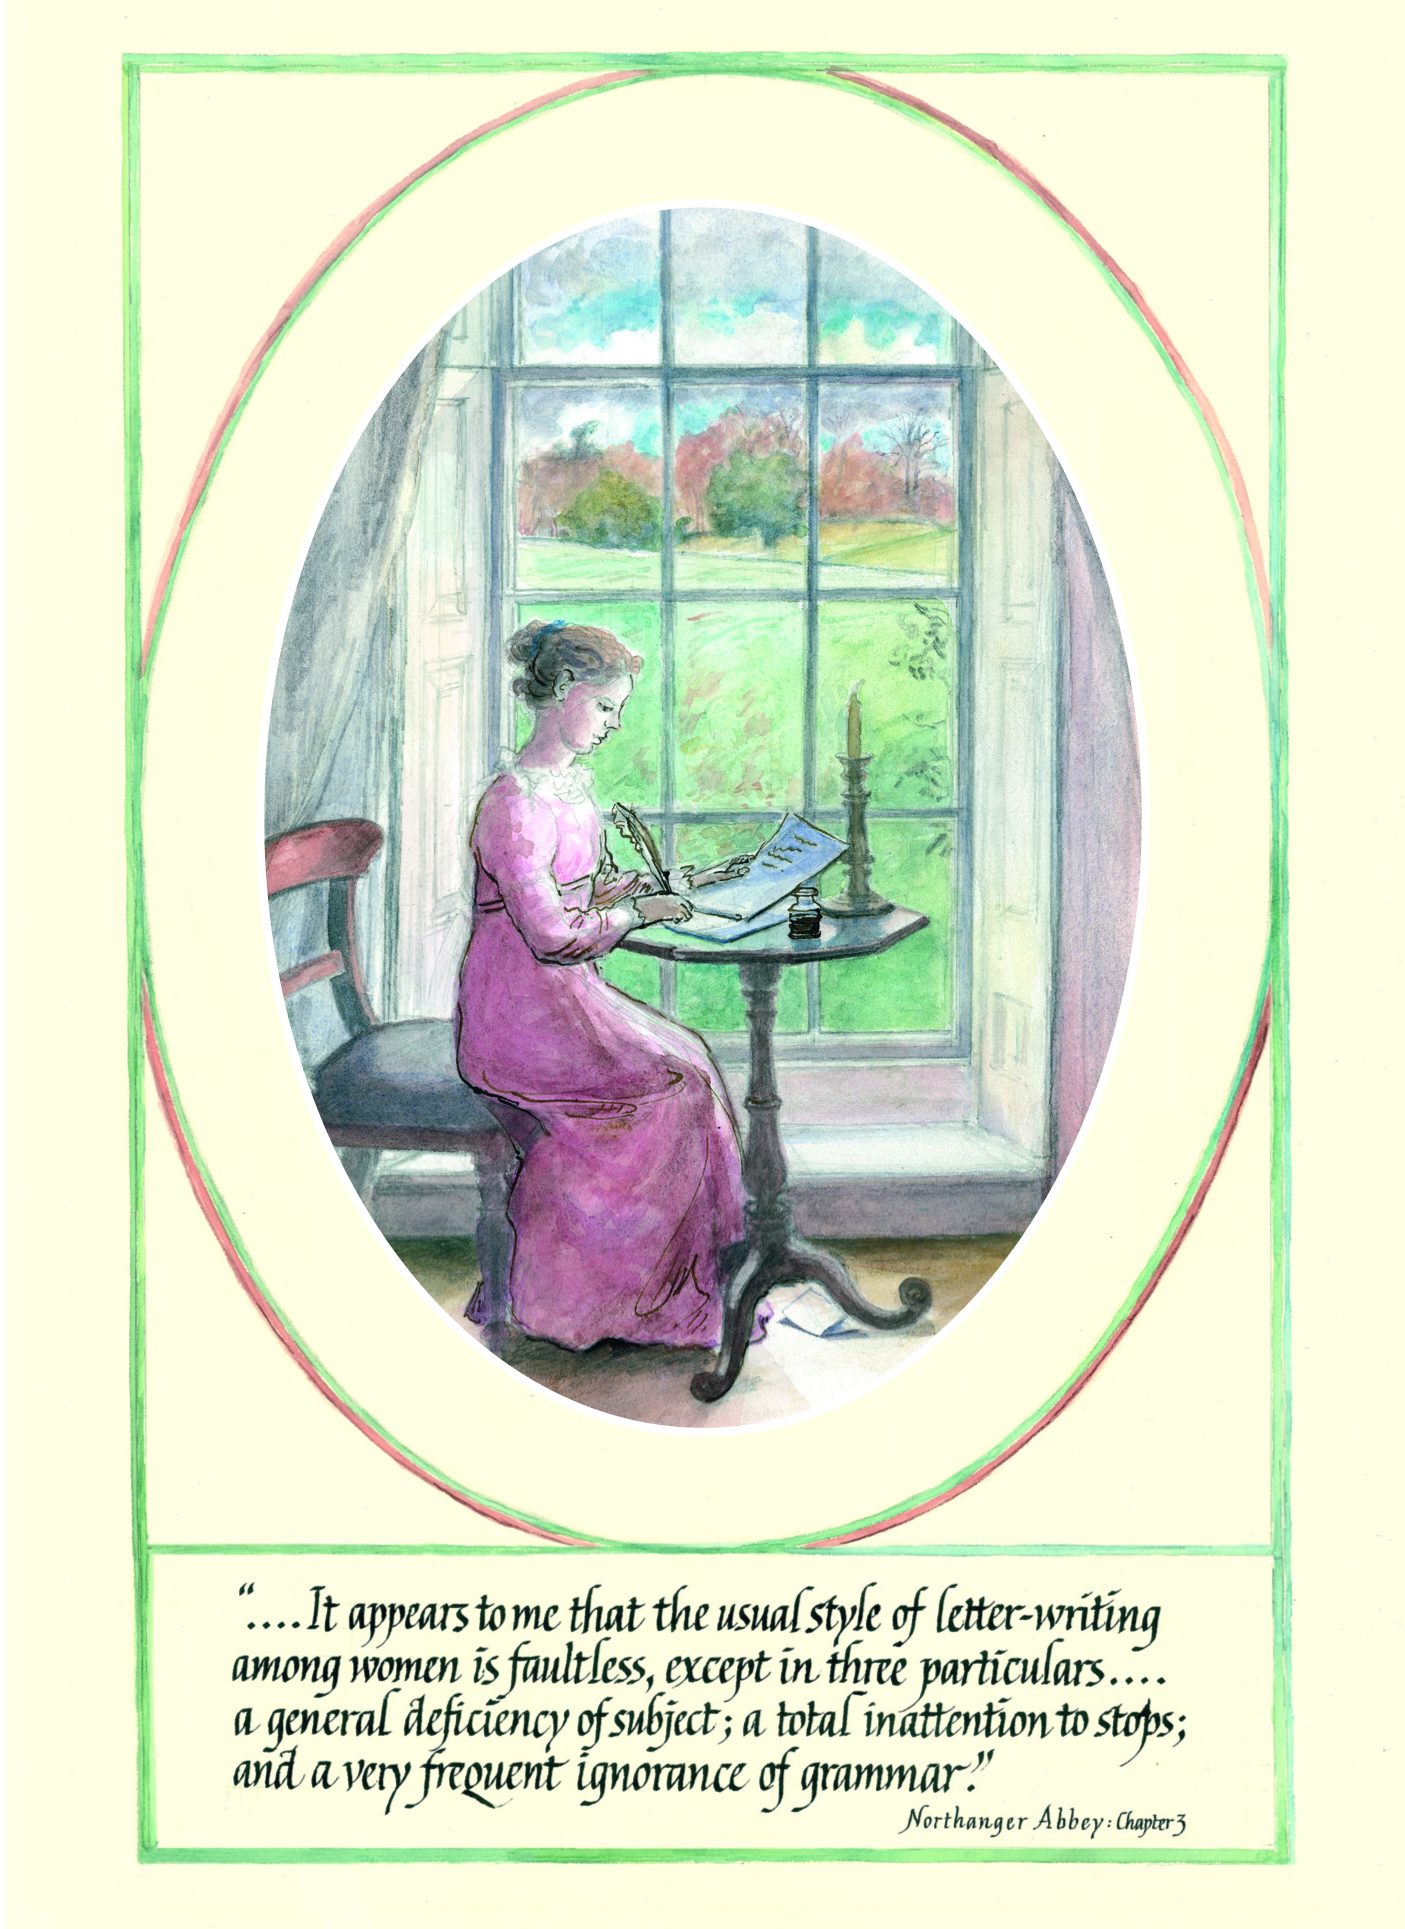 It appears to method the usual style of letter writing among women is faultless - Jane Austen card on sale at Winchester Cathedral gift shop.